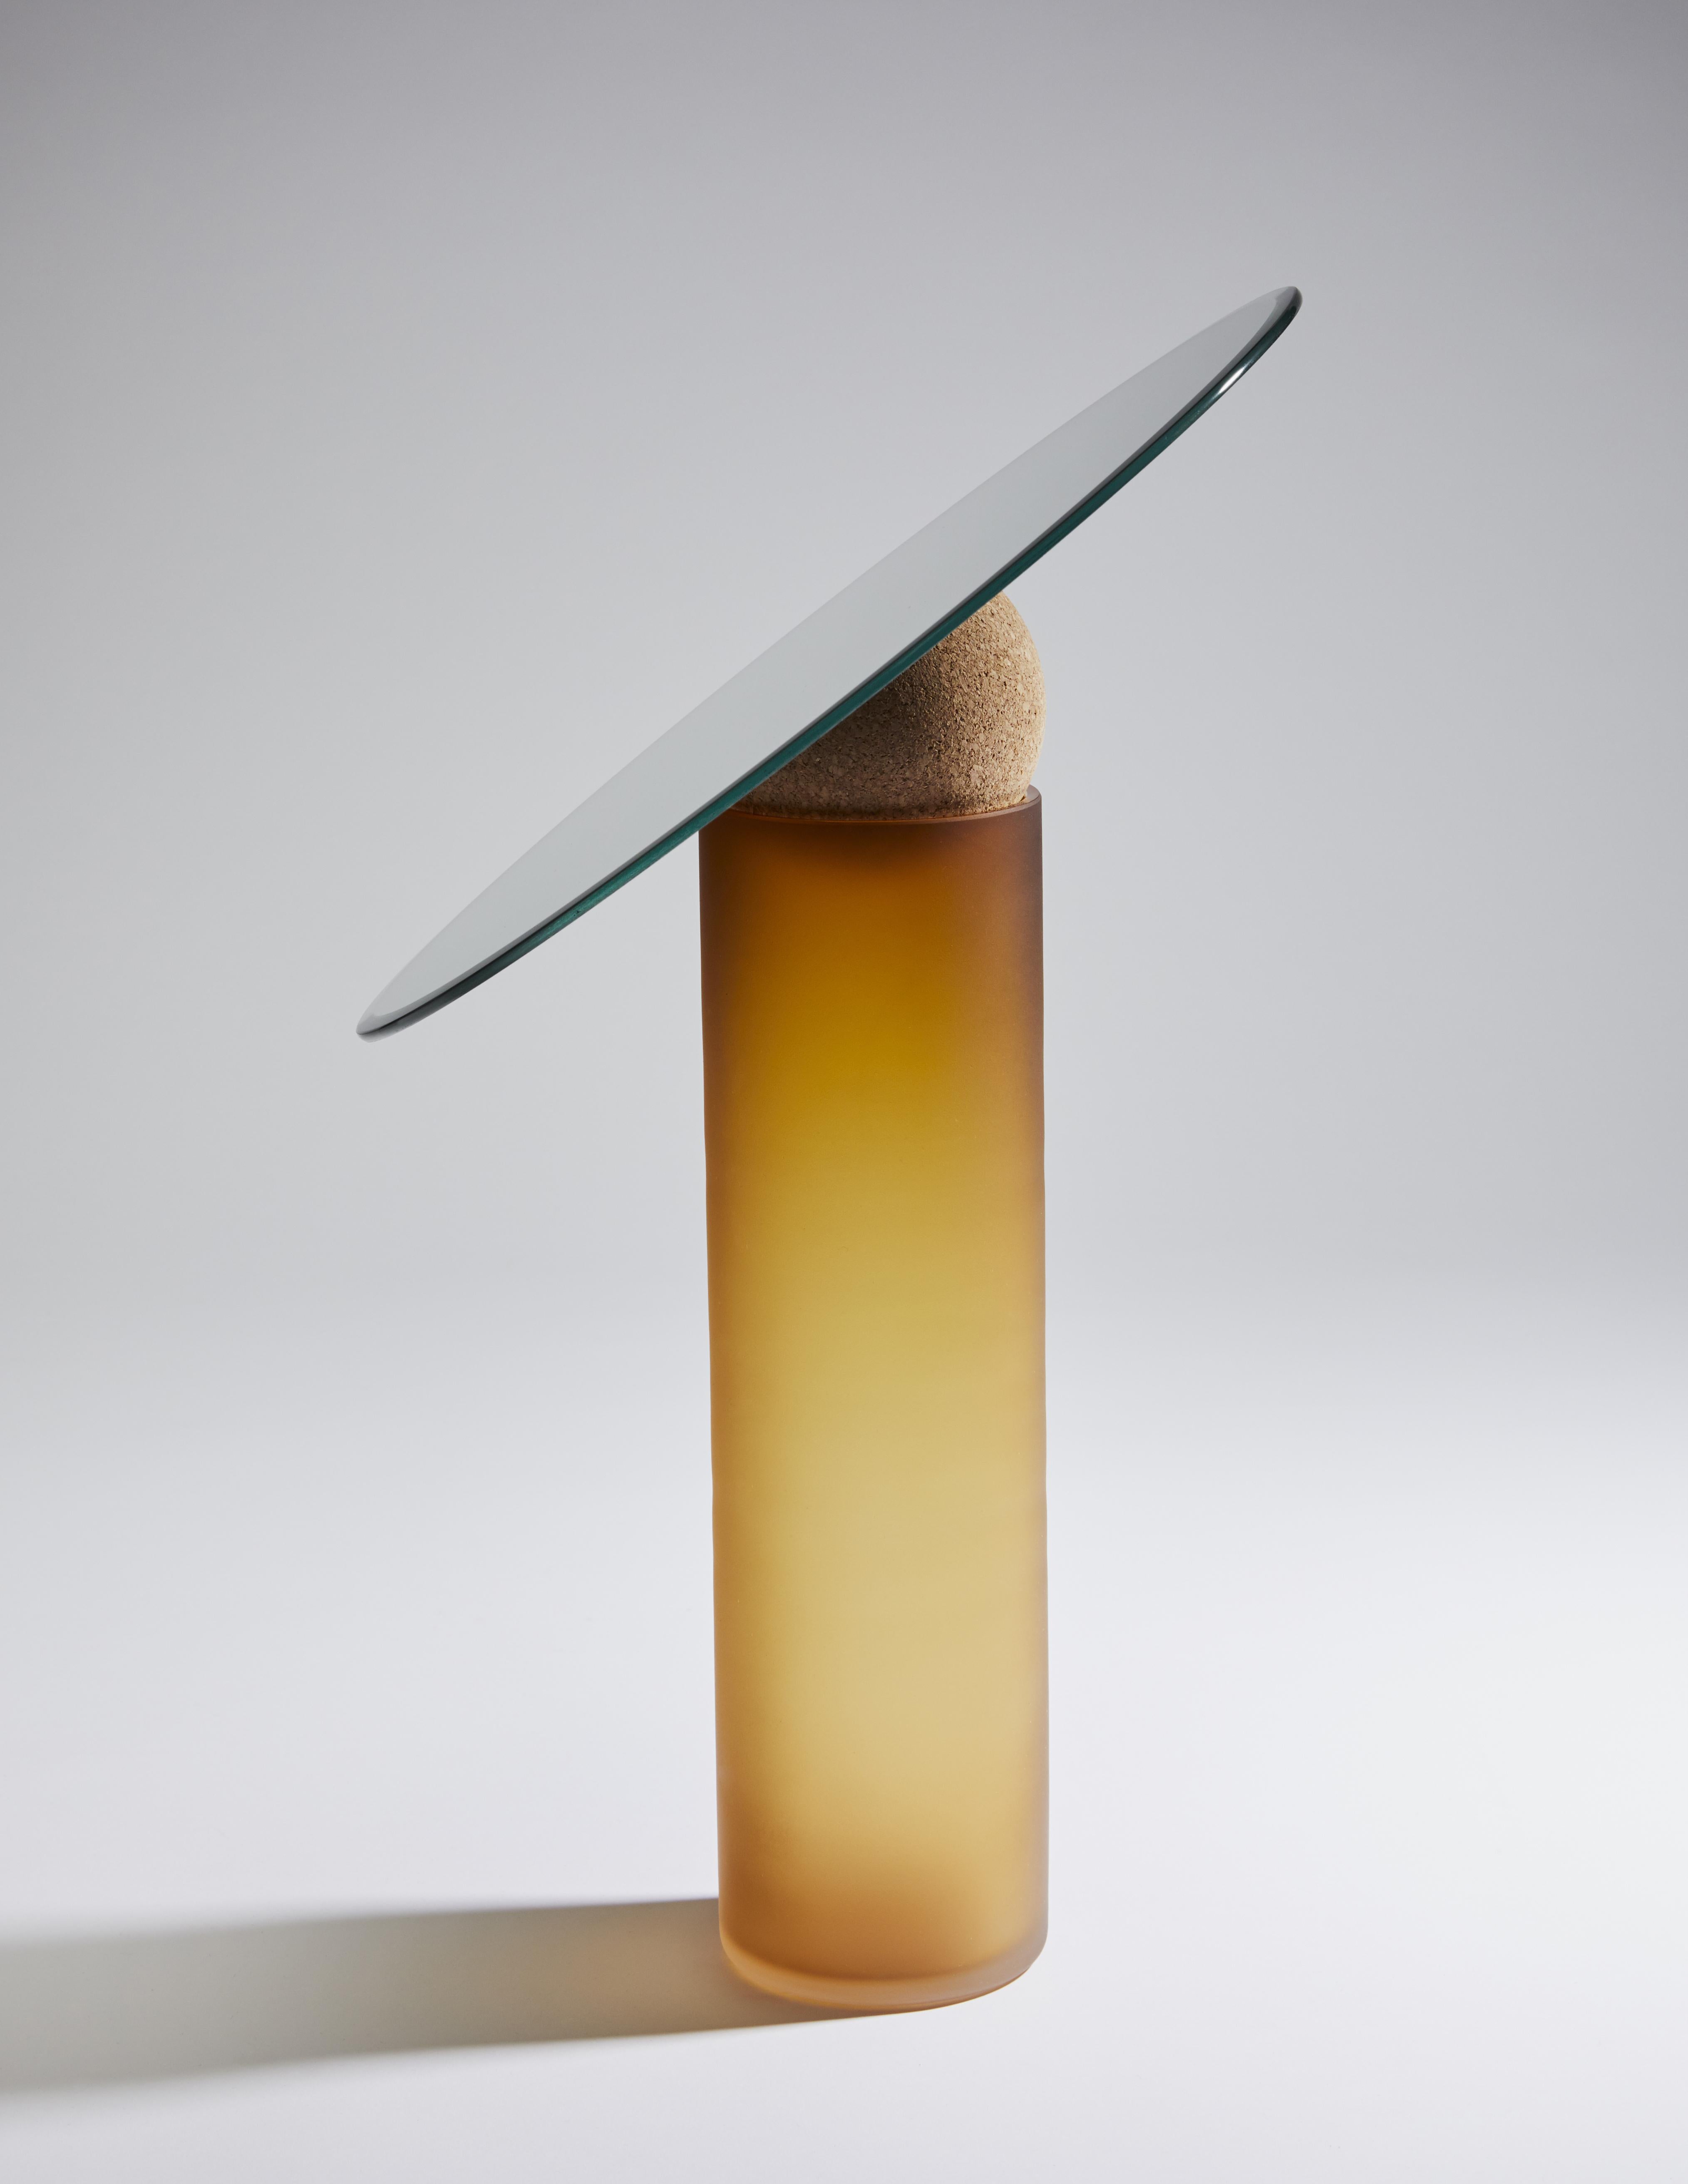 Astra Table Mirror-34 by Clemence Birot
Dimensions: Mirror Ø 34 x 50 cm
Materials: mirror, glass, cork. 
Available in shiny and sandblasted version.

Clemence Birot started her career in Copenhagen, Denmark, and discovered a design practice